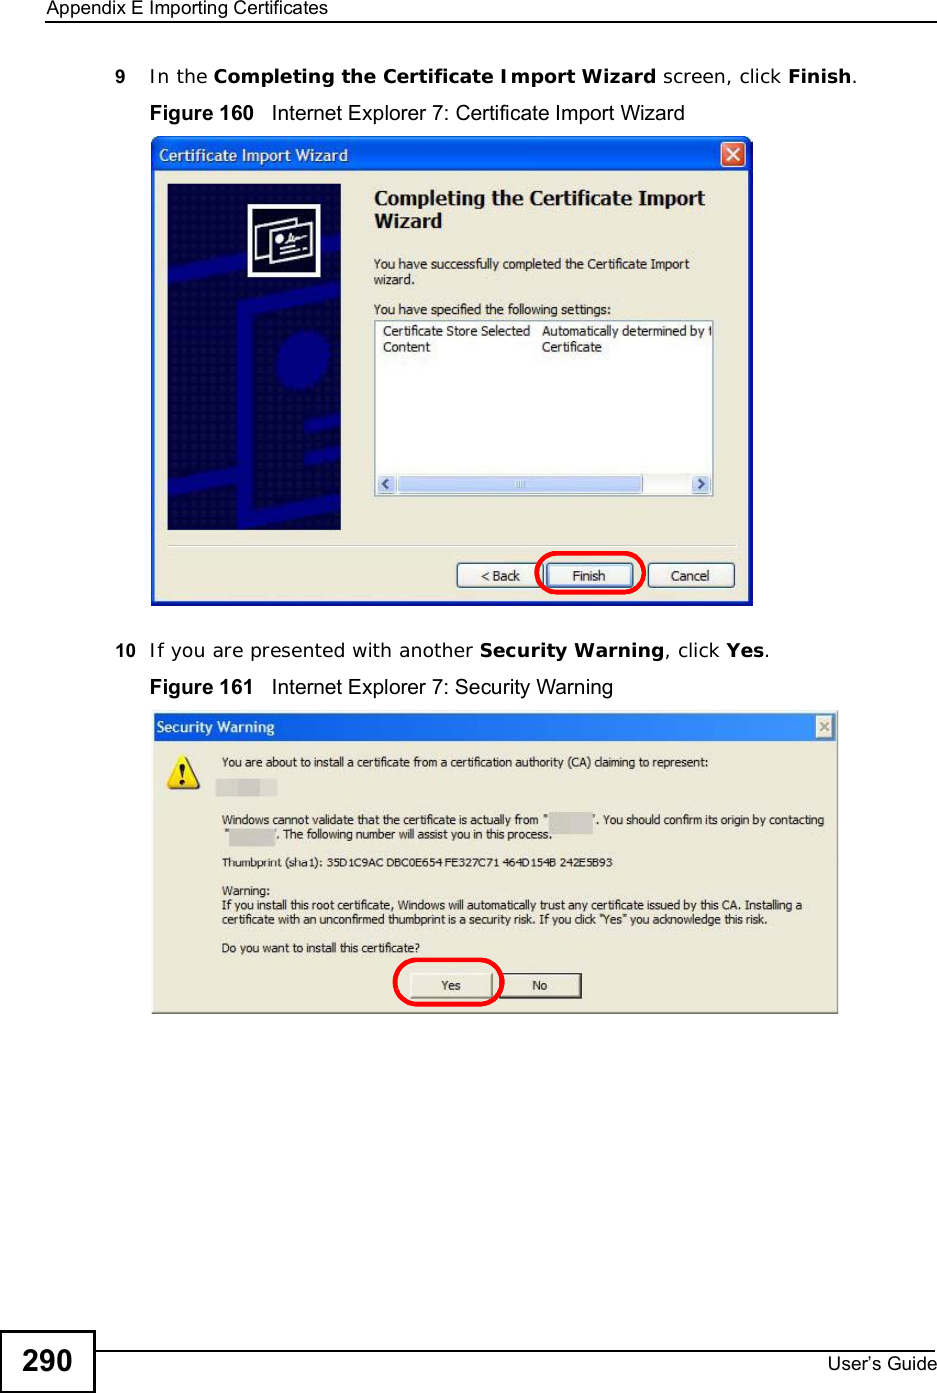 Appendix EImporting CertificatesUser s Guide2909In the Completing the Certificate Import Wizard screen, click Finish.Figure 160   Internet Explorer 7: Certificate Import Wizard10 If you are presented with another Security Warning, click Yes.Figure 161   Internet Explorer 7: Security Warning